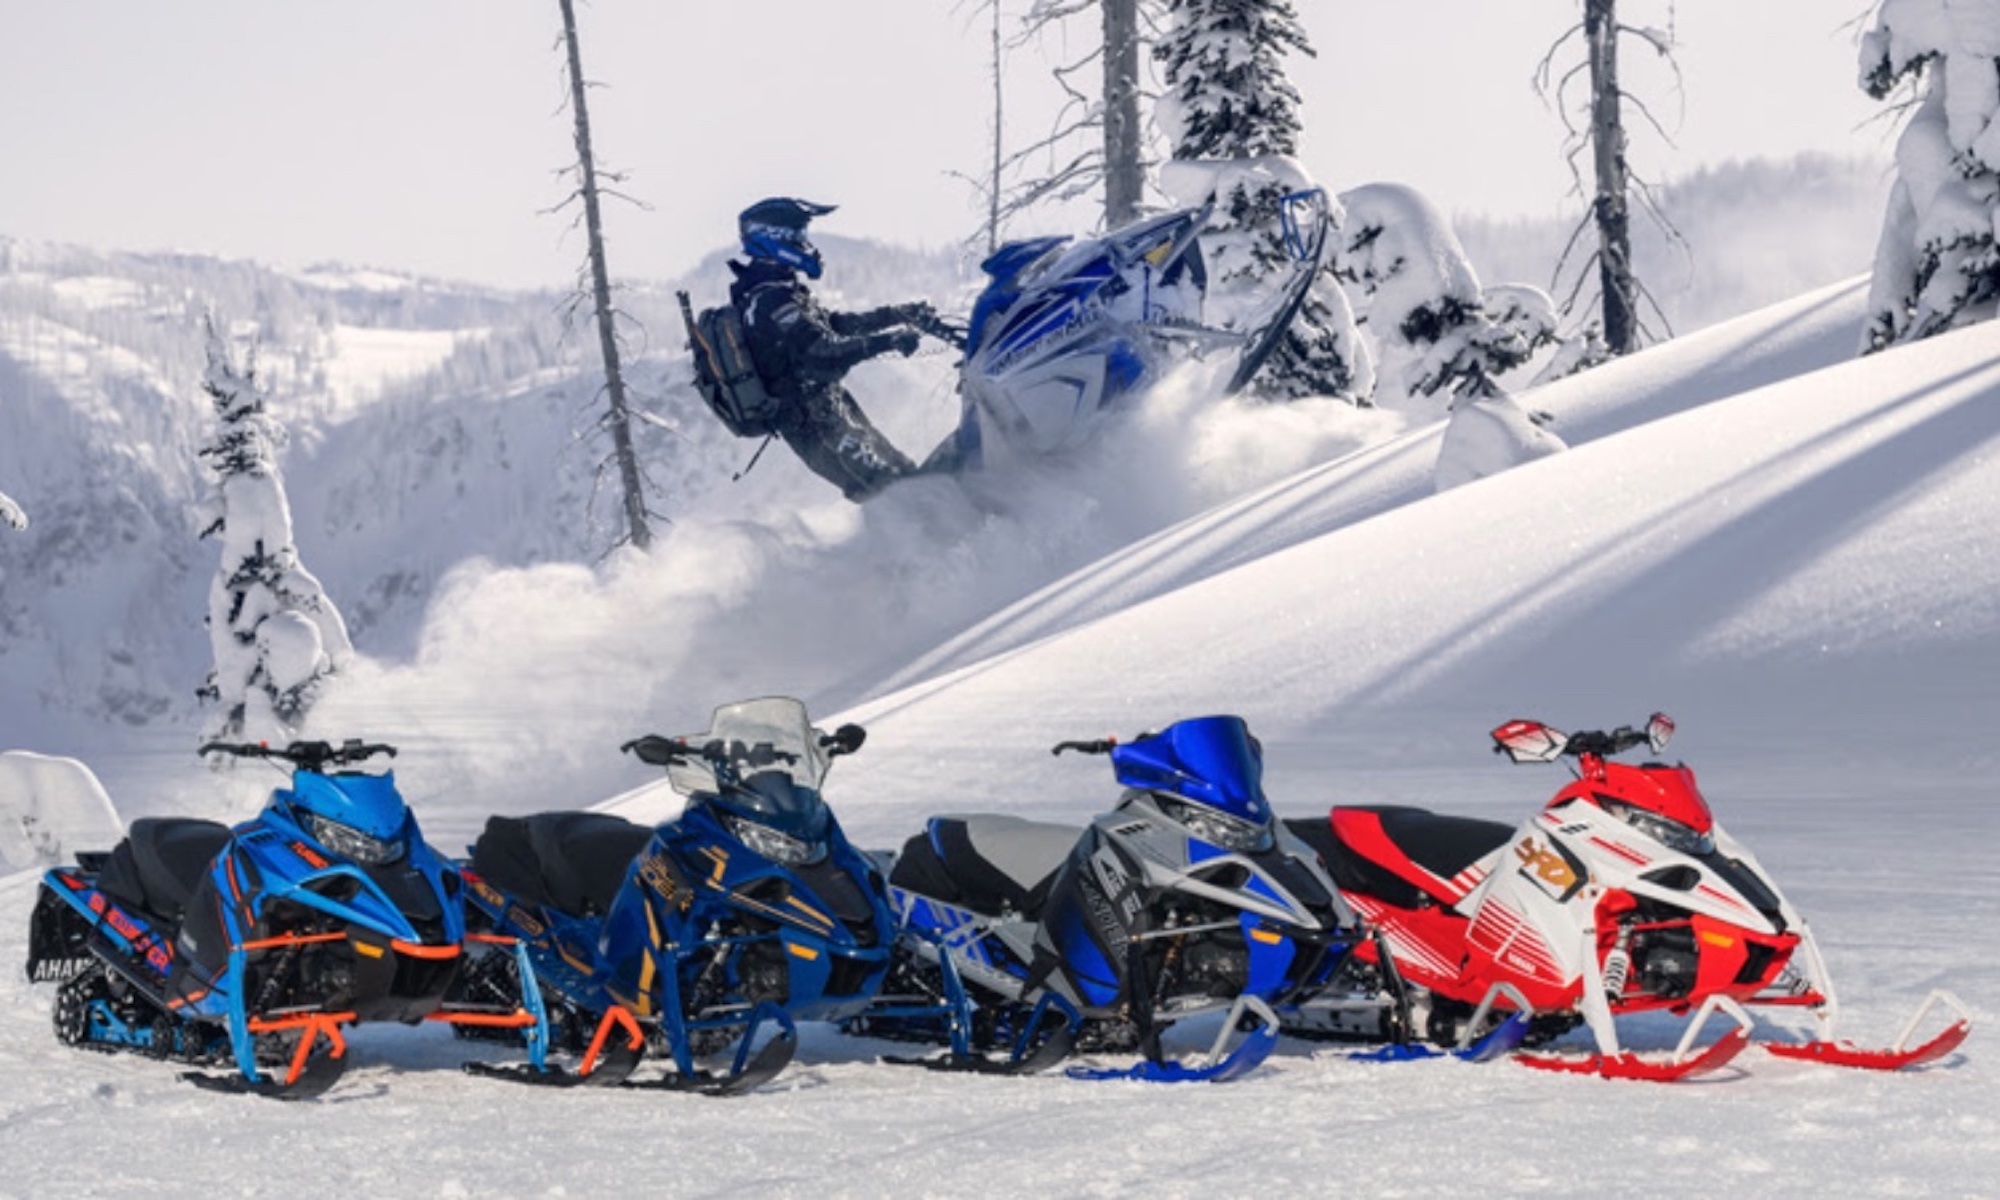 A snowmobile from Yamaha - something that will no longer exist after MY2024. Media sourced from SnoRiders.